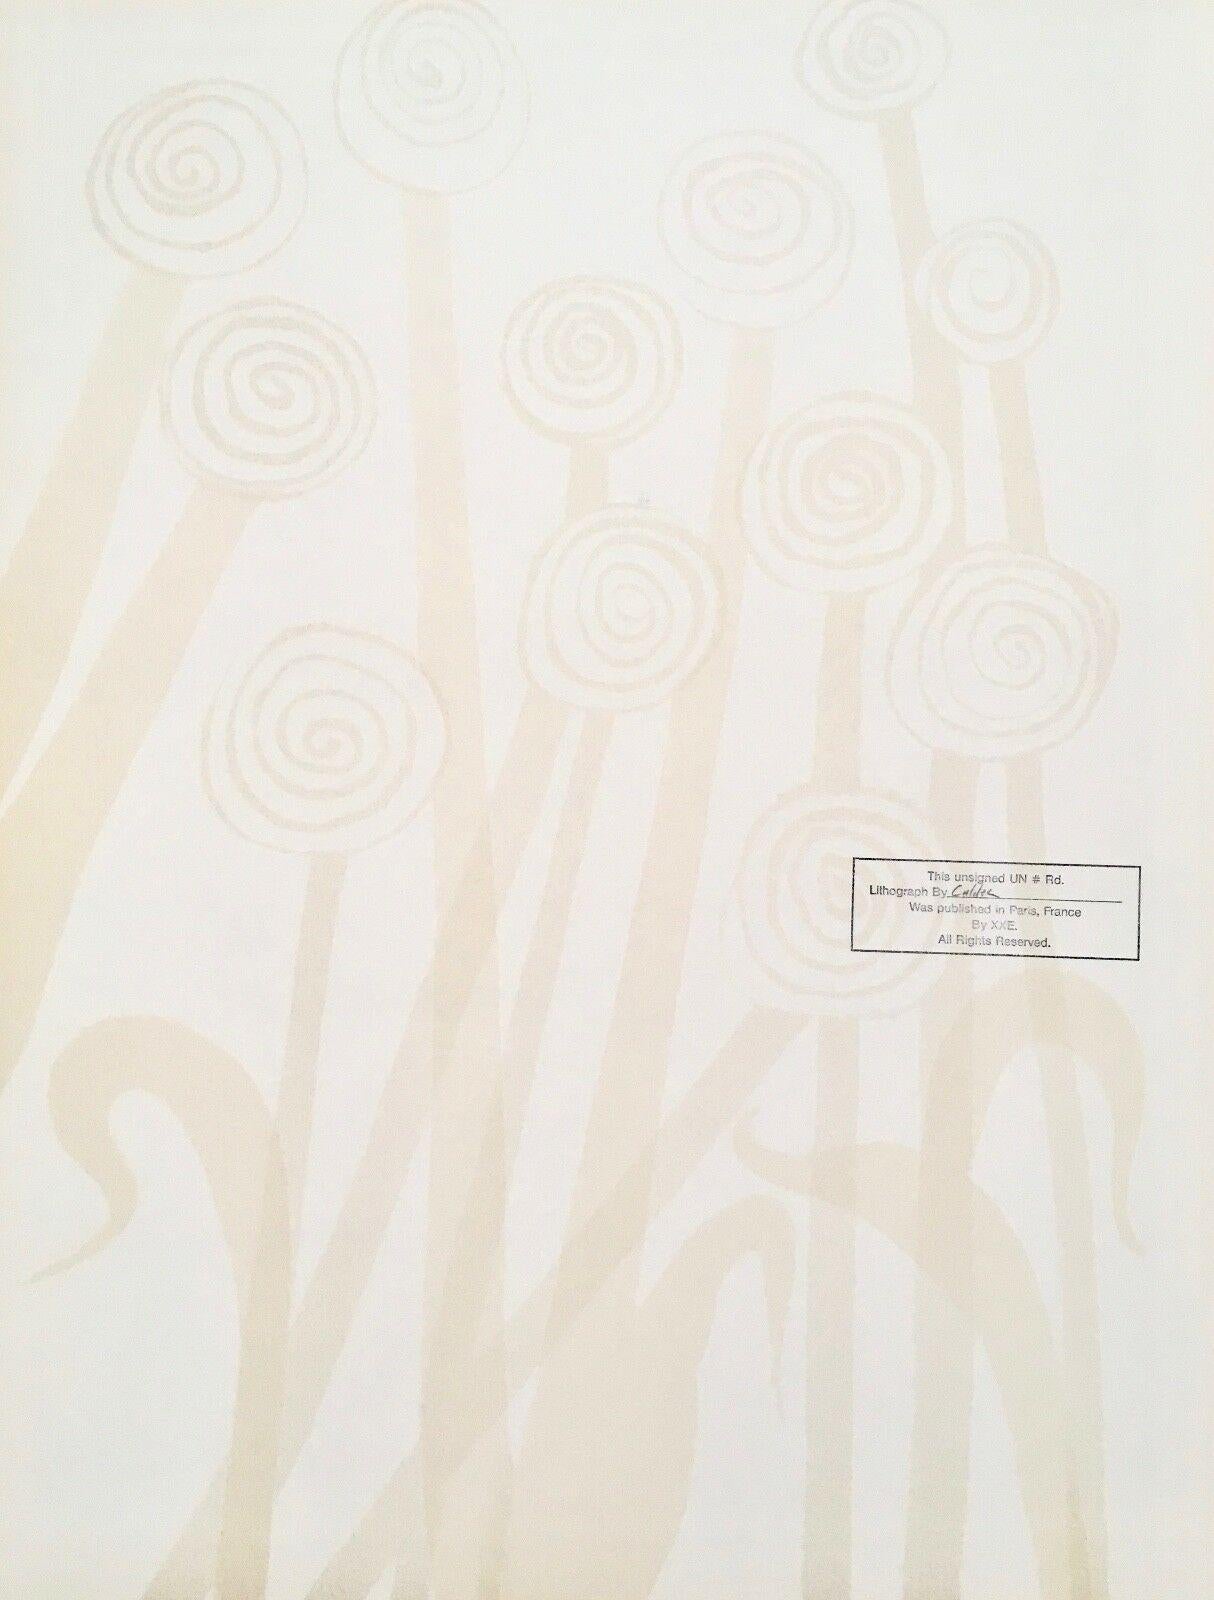 Artist: Alexander Calder (1898-1976)
Title: Untitled (Flowers), from Magie Eolienne Portfolio
Year: 1972
Medium: Lithograph on Arches paper
Edition: 75, plus signed and unsigned proofs
Size: 22.50 x 19.50 inches
Condition: Excellent
Inscription: